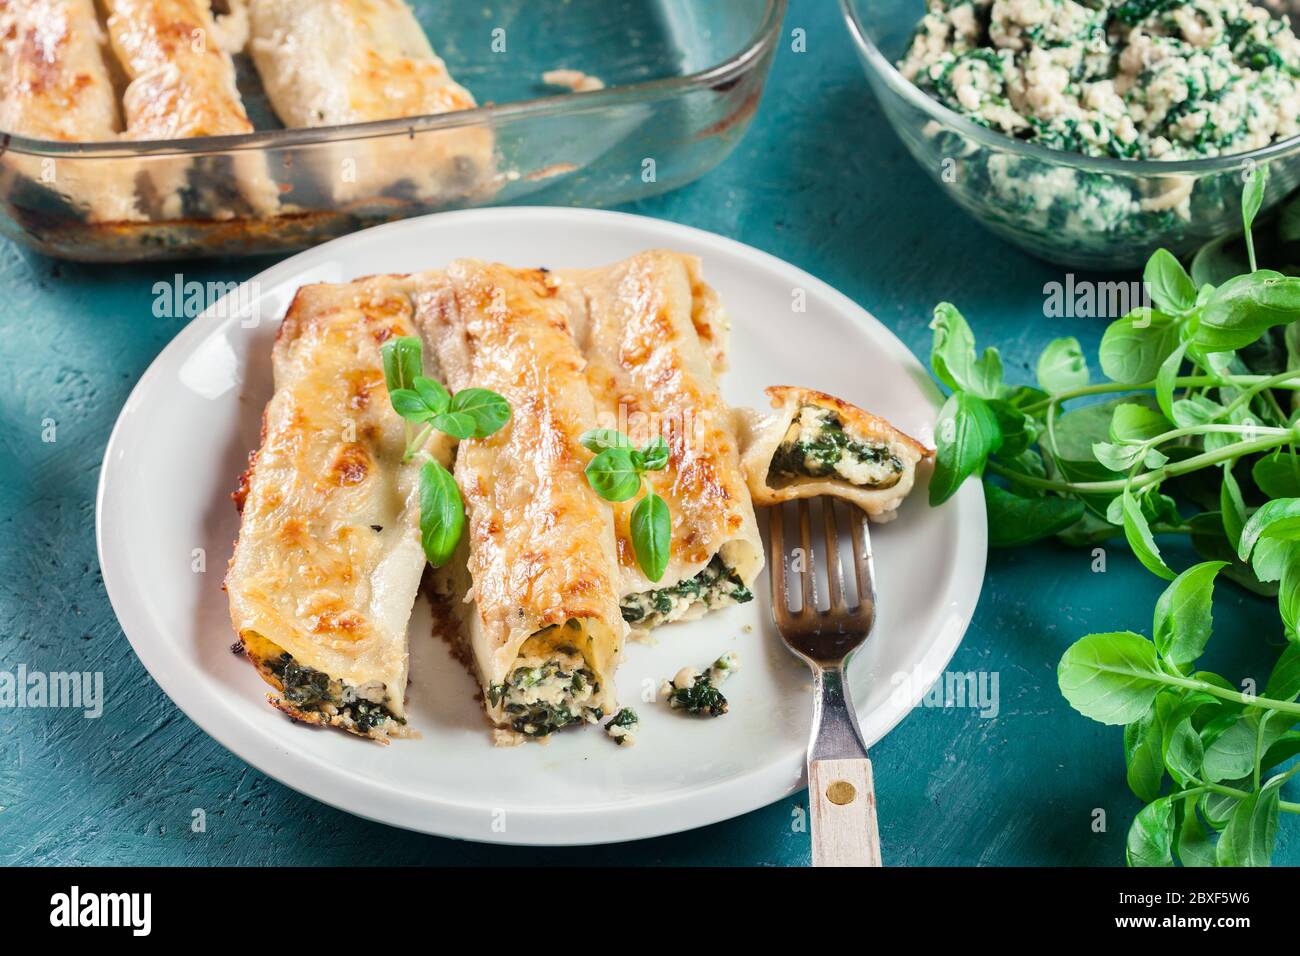 Portion of cannelloni stuffed with spinach and ricotta. Italian cuisine Stock Photo